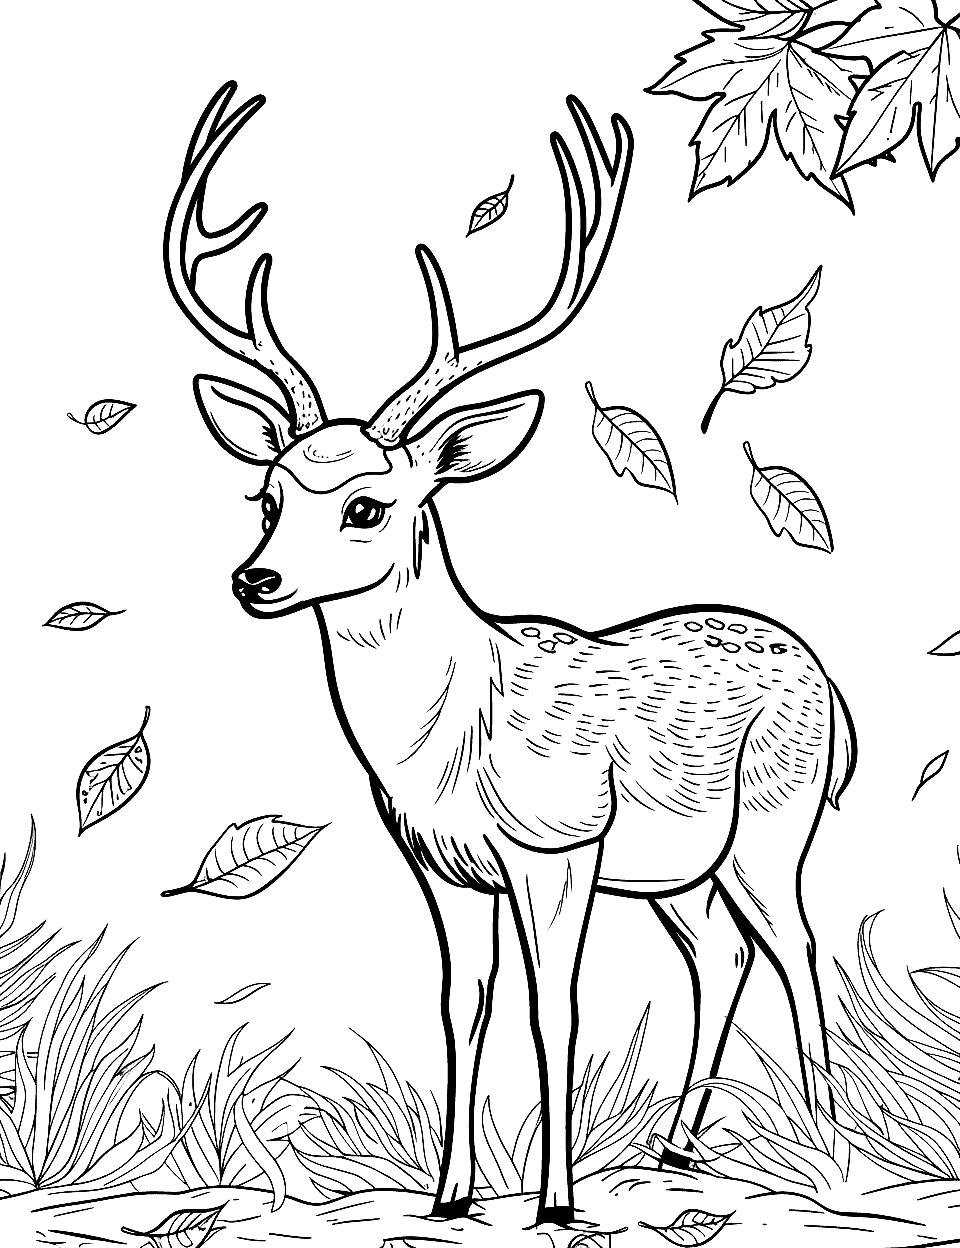 35 Deer Coloring Pages: Free Printable Sheets